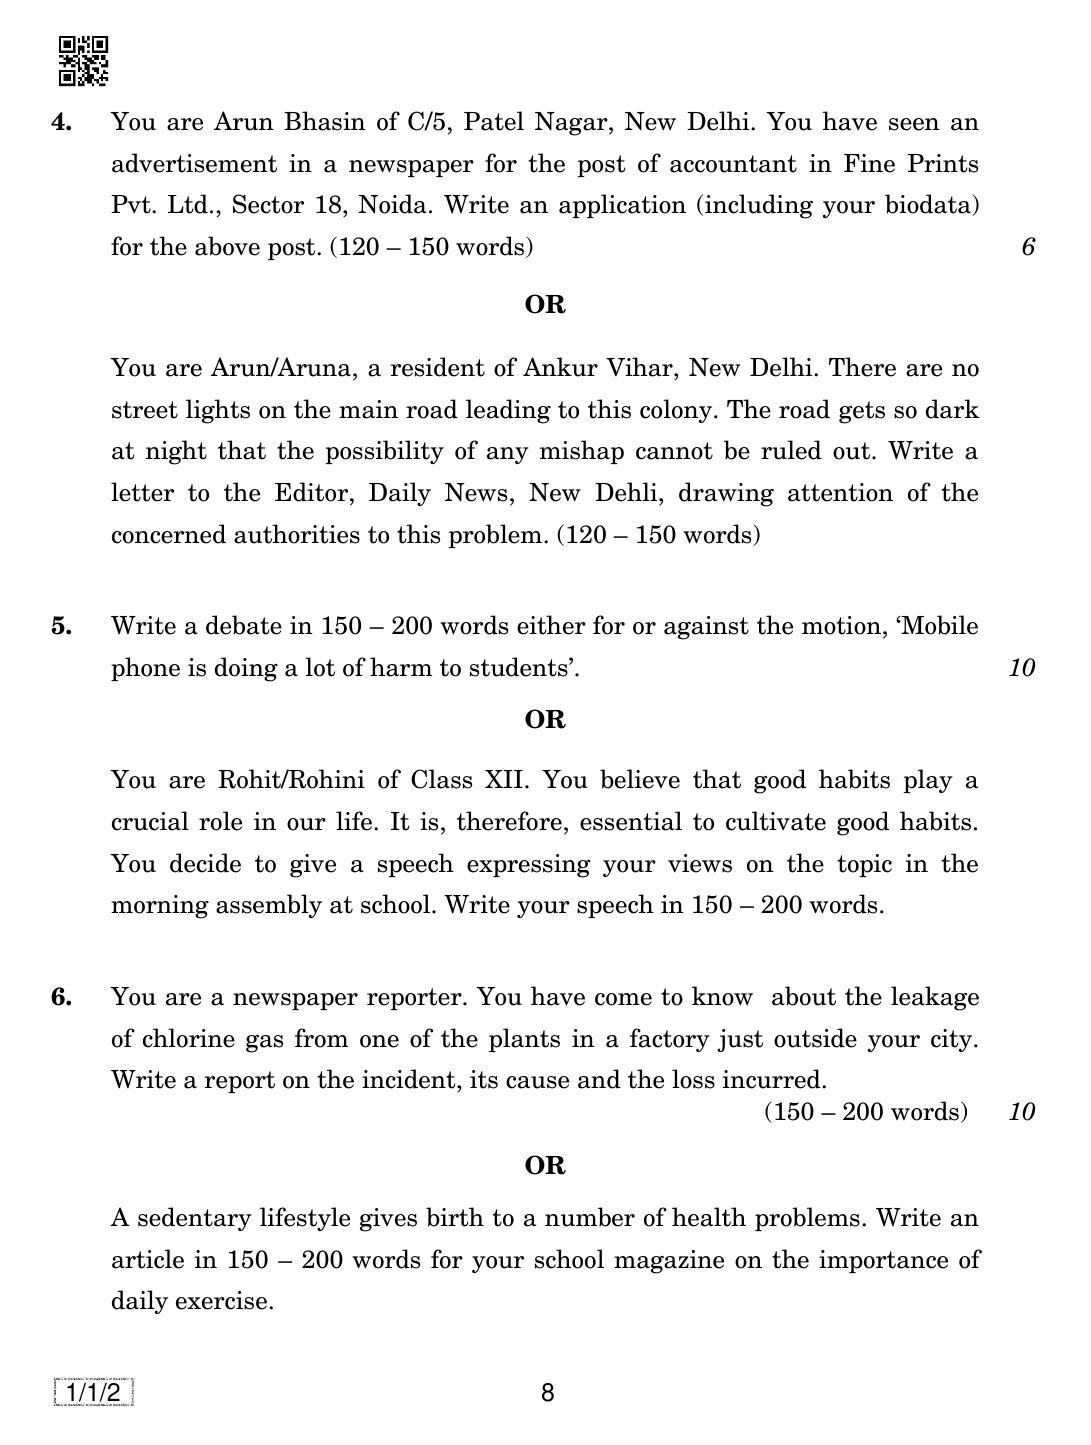 CBSE Class 12 1-1-2 ENGLISH CORE 2019 Compartment Question Paper - Page 8